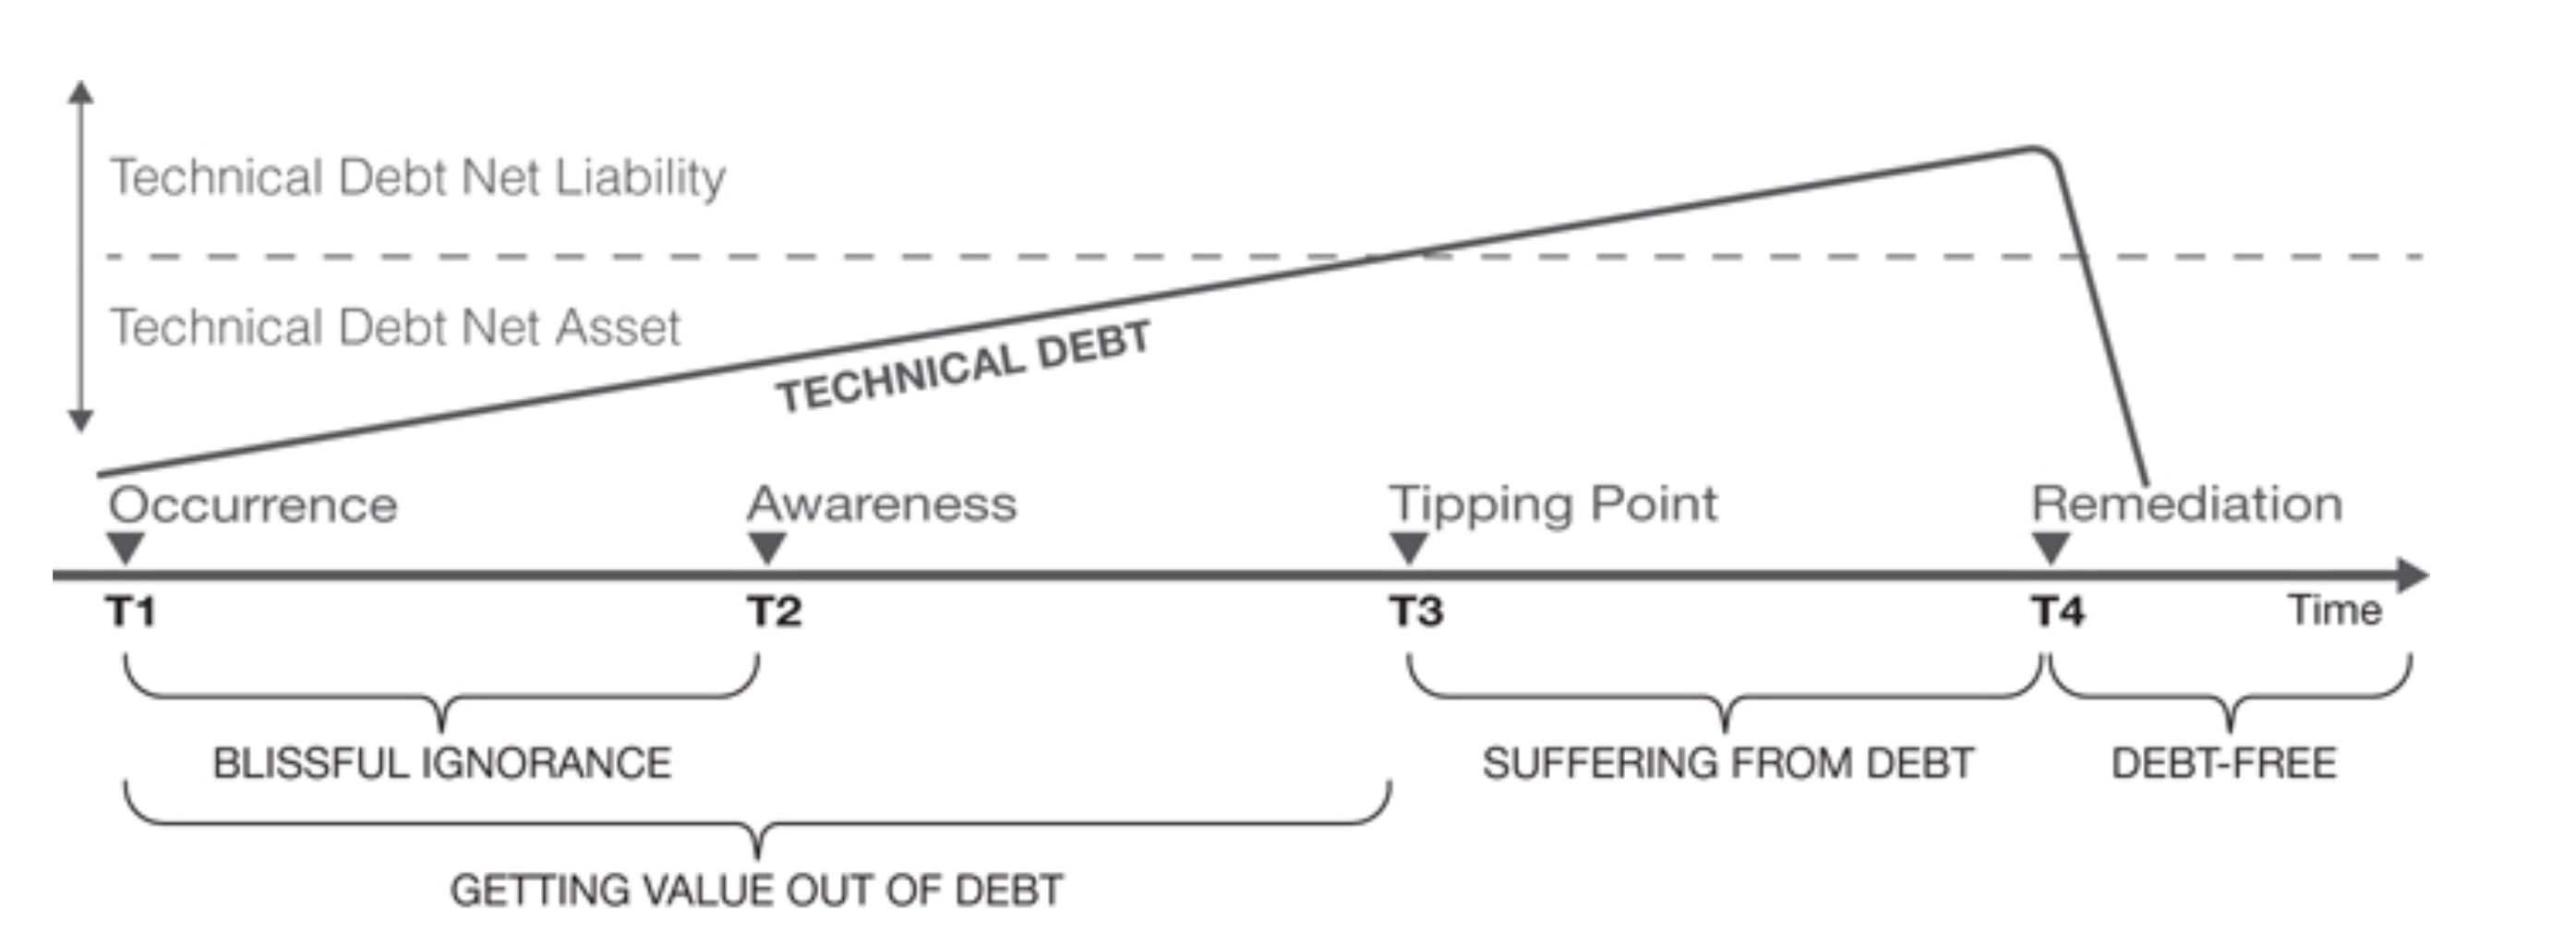 Technical Debt Stages